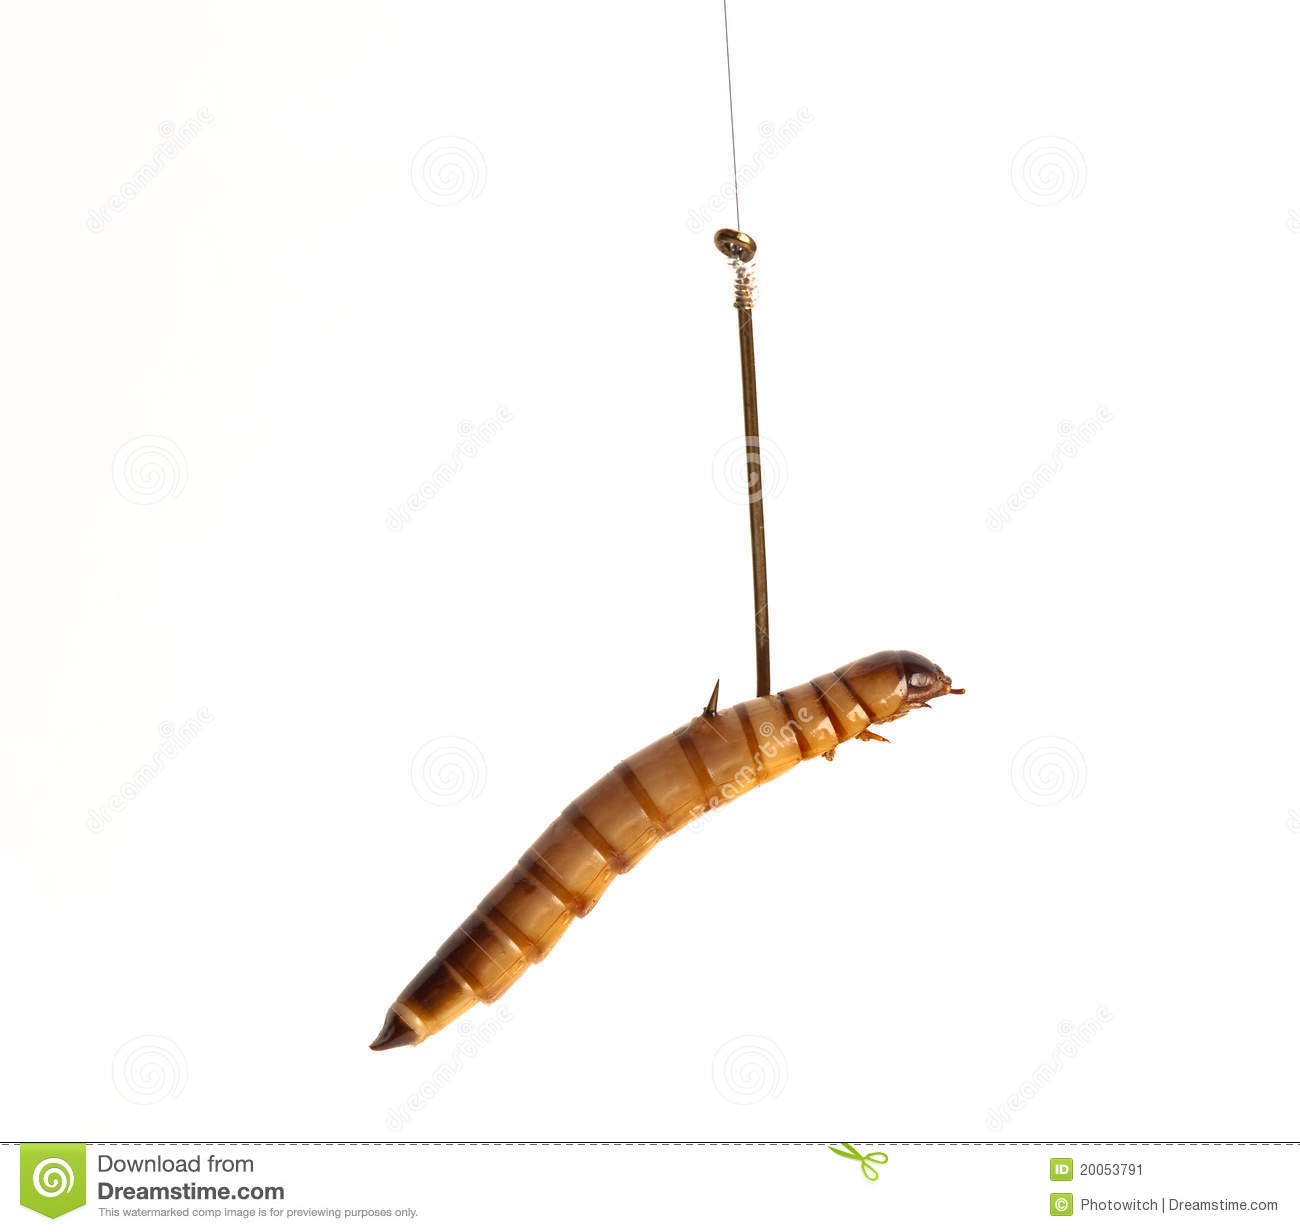 Mealworm Or Worm On A Fishing Hook As Bait